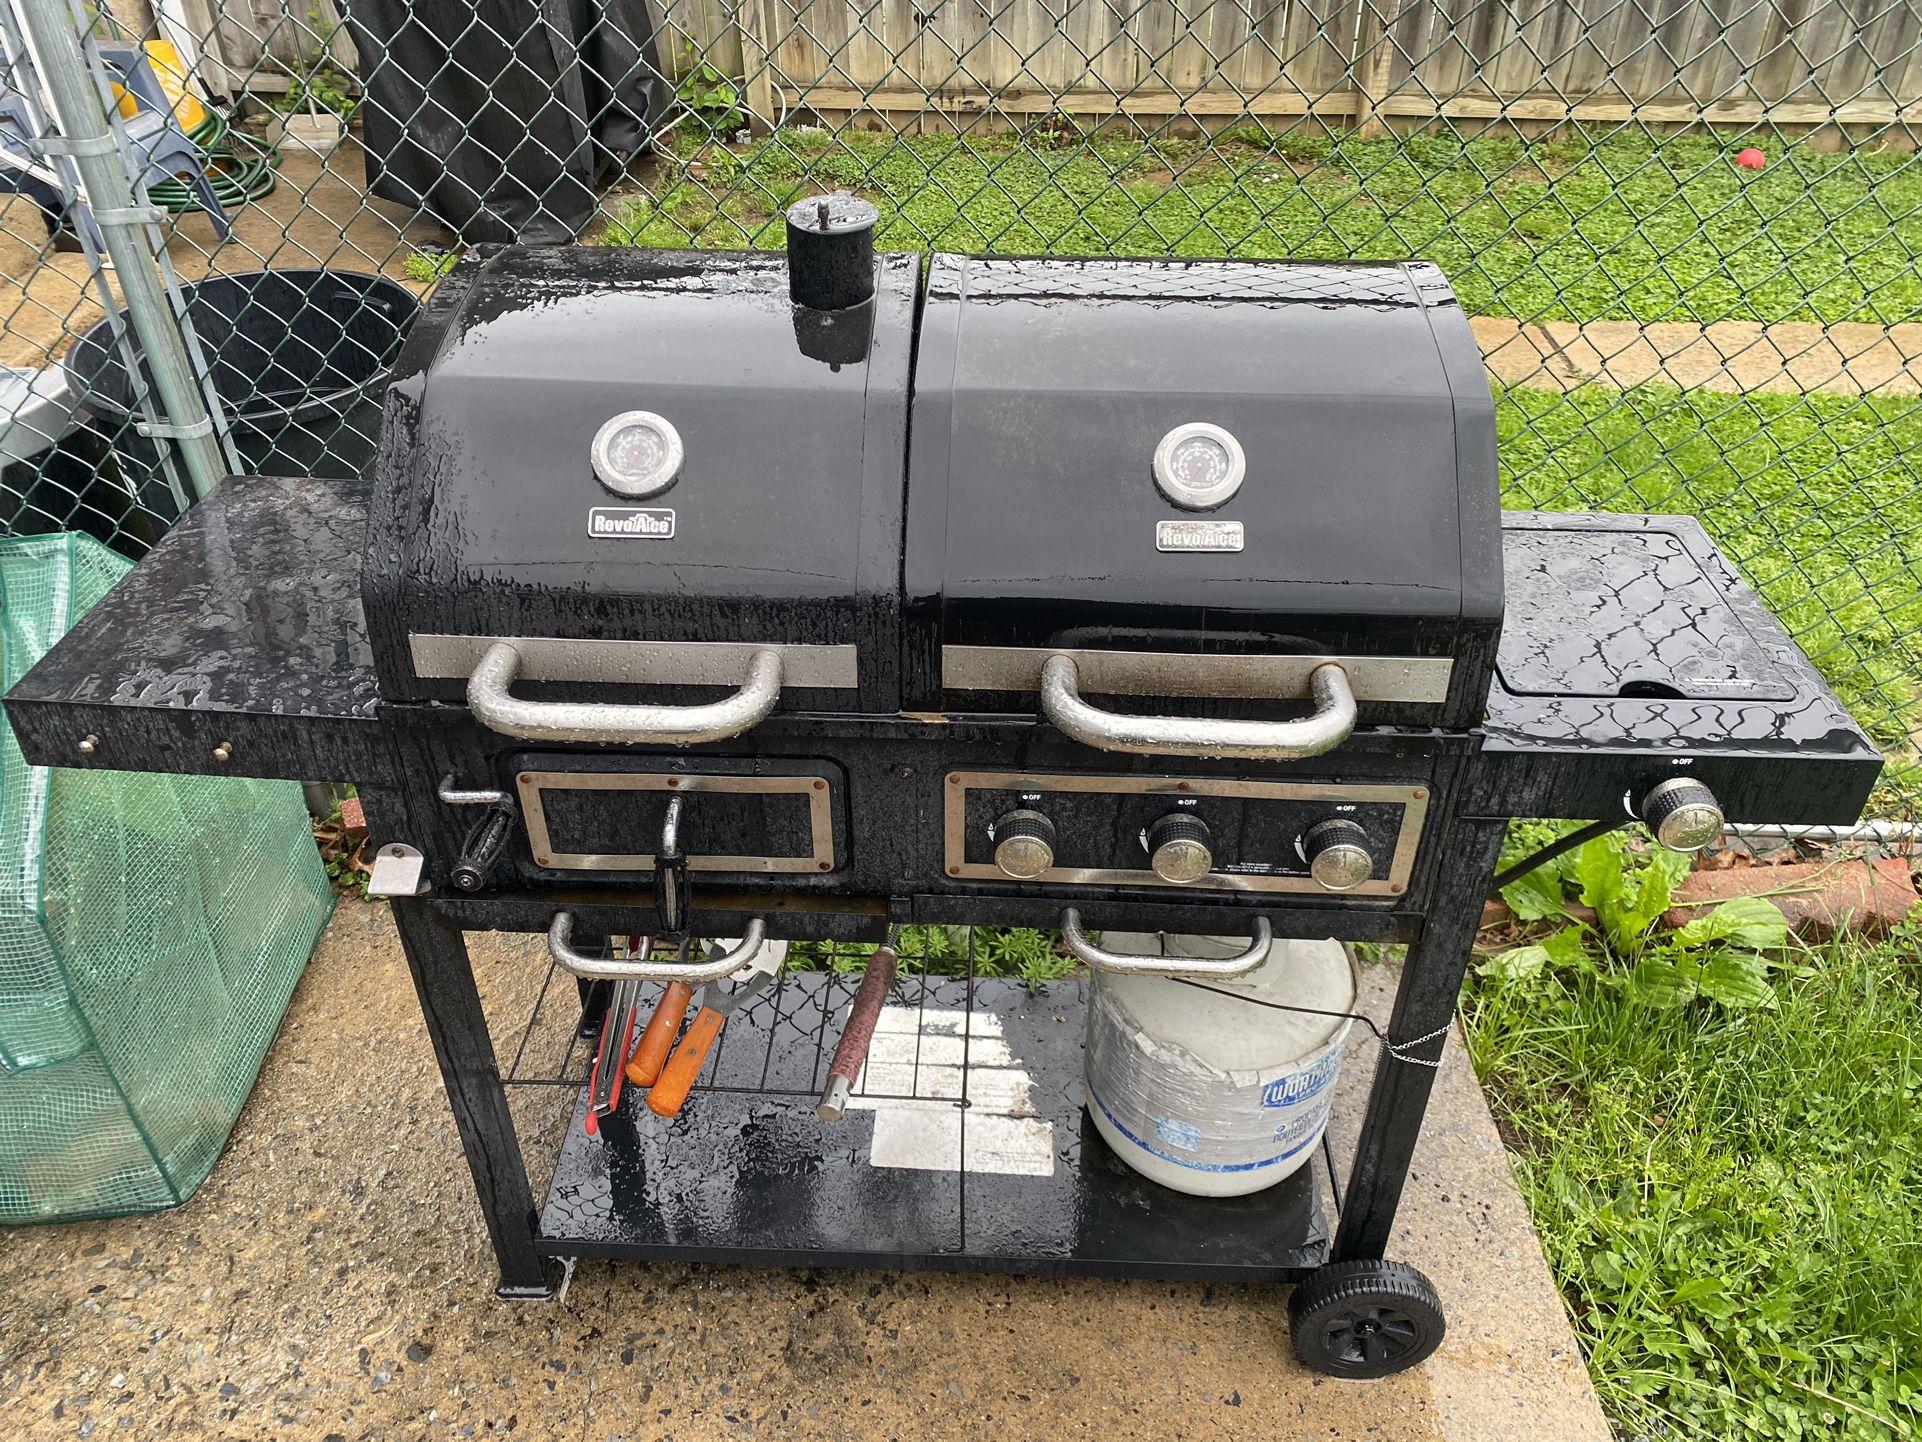 Used Grill For Freee ( Read Description Below)